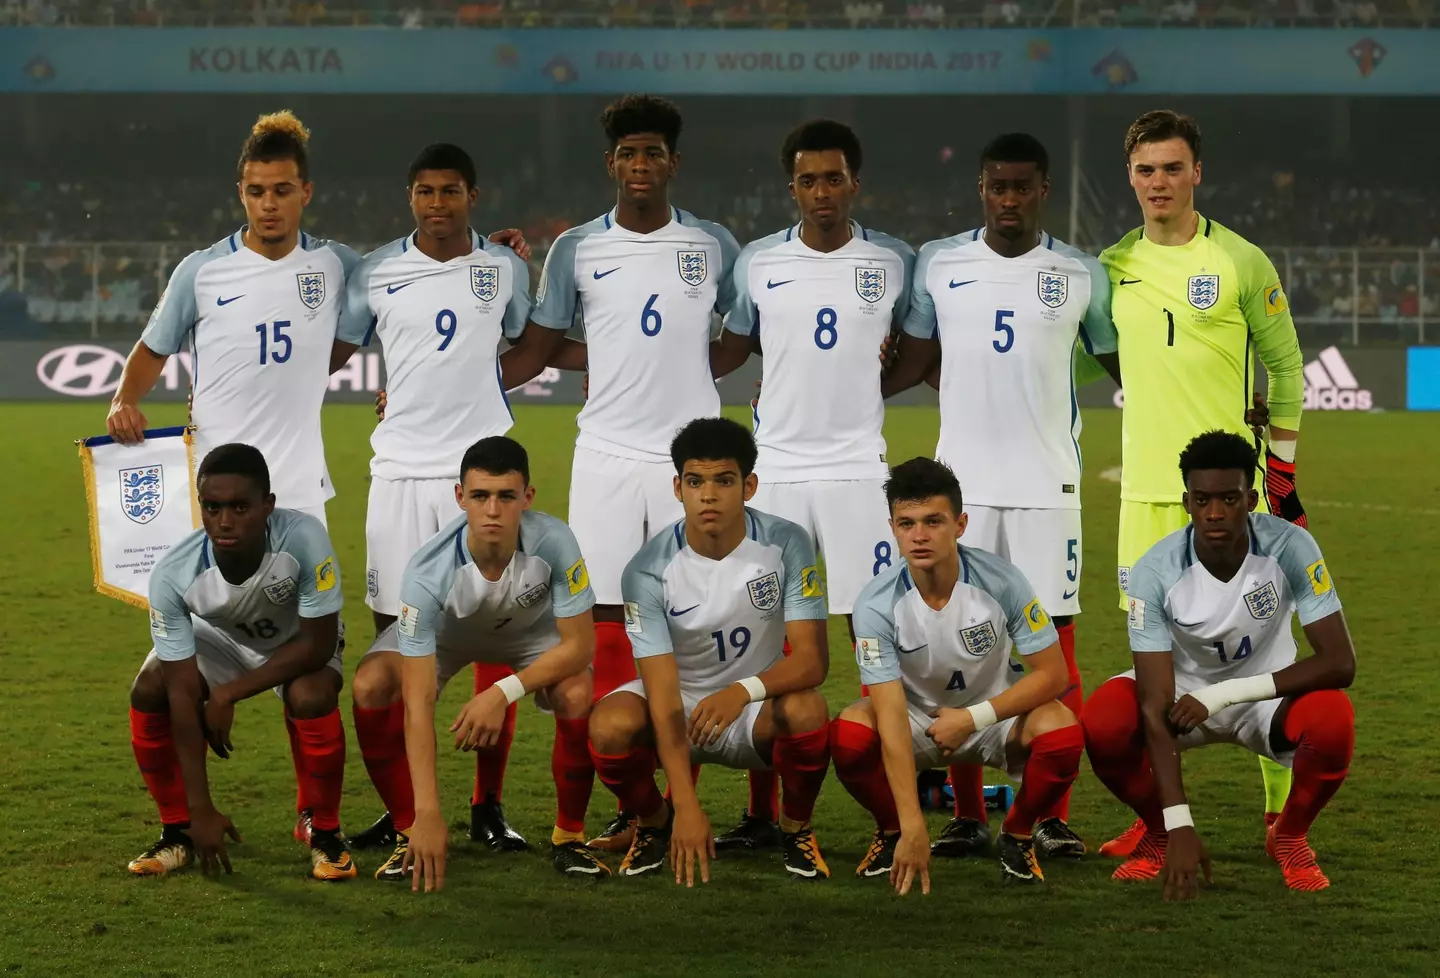 The England U-17 World Cup team in 2017. A few familiar faces. (Image